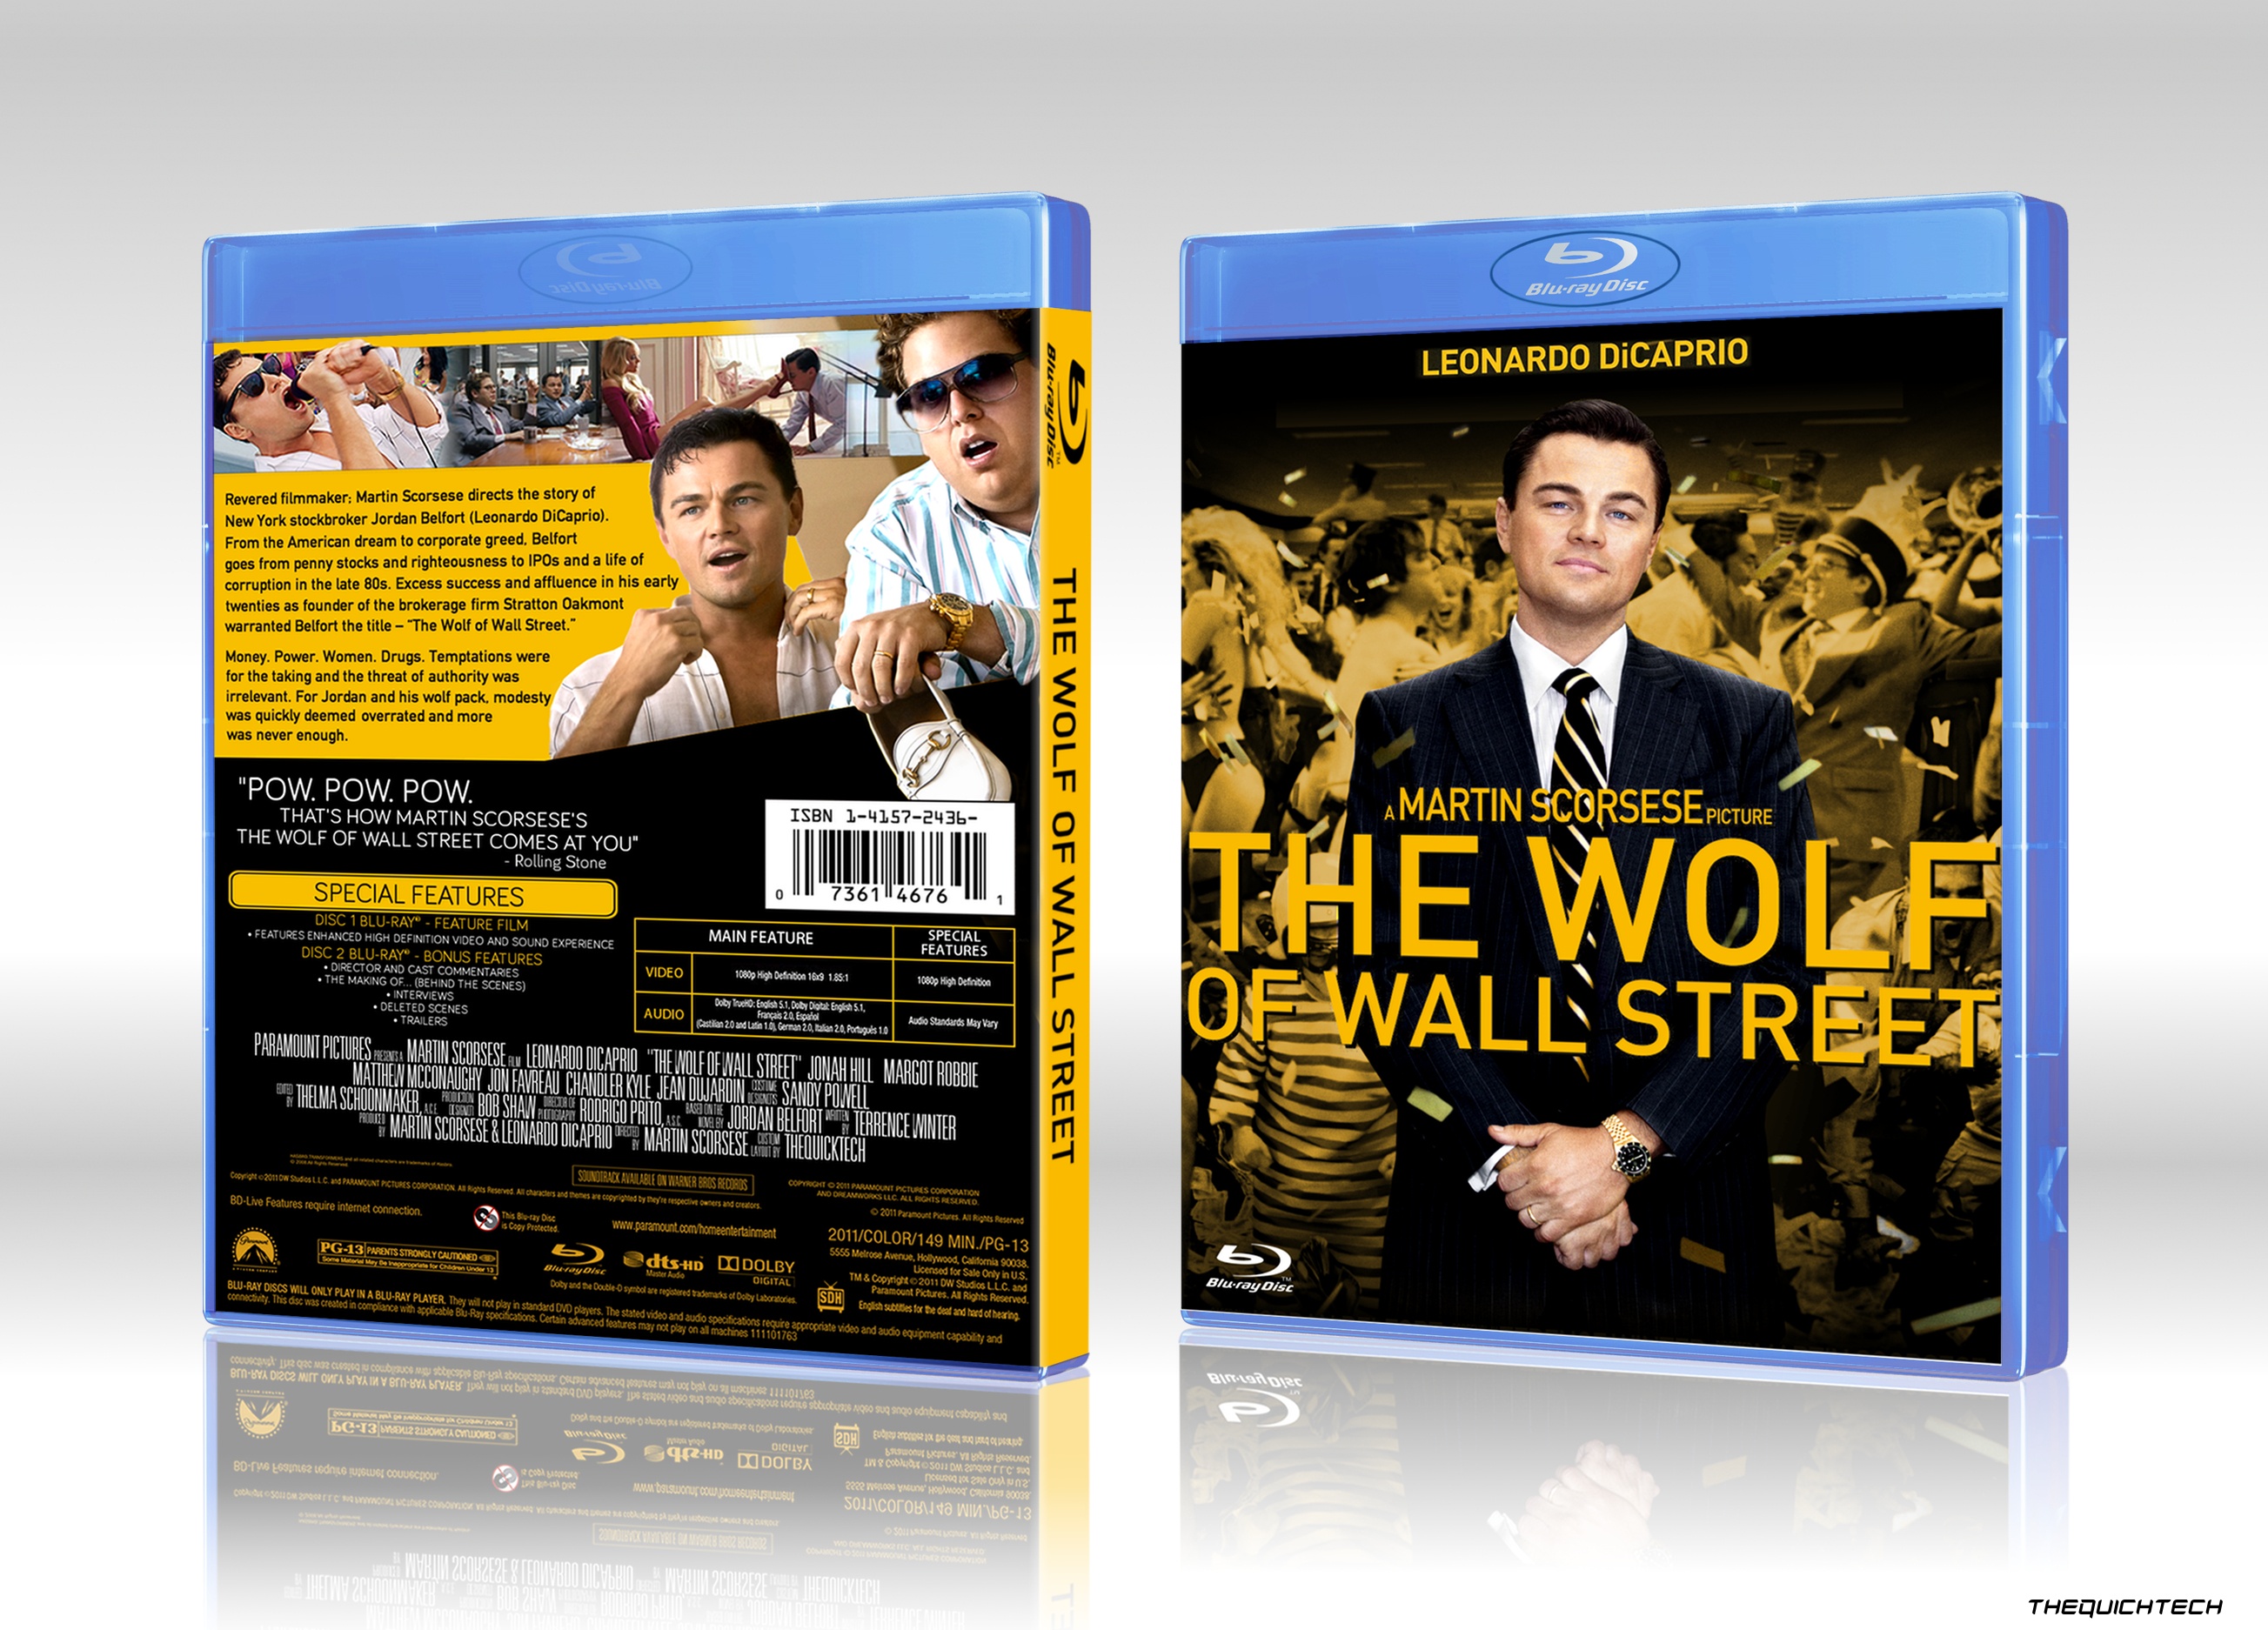 The Wolf Of Wall Street box cover